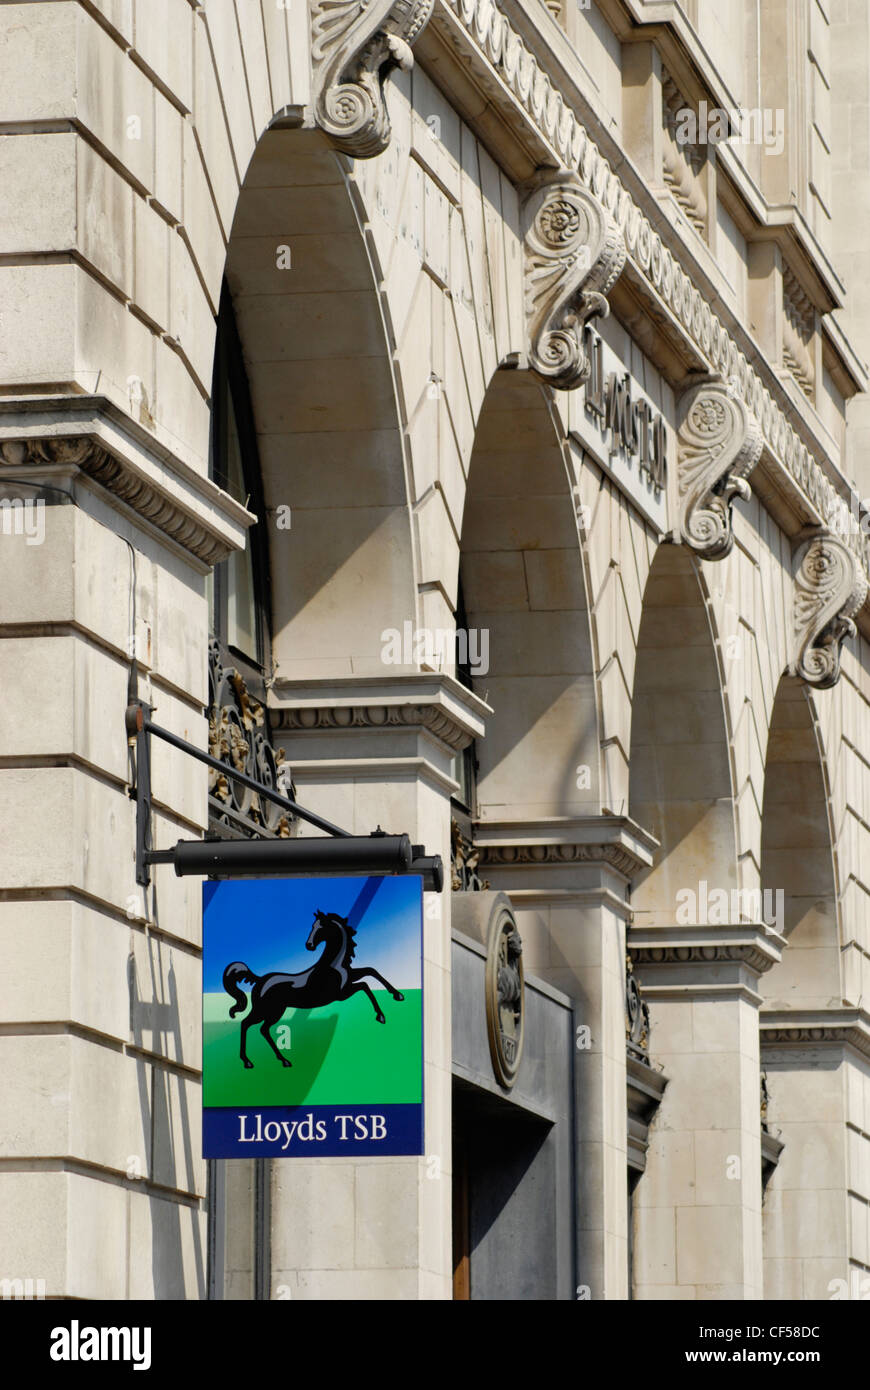 Exterior of a Lloyds TSB bank branch in Central London. Stock Photo